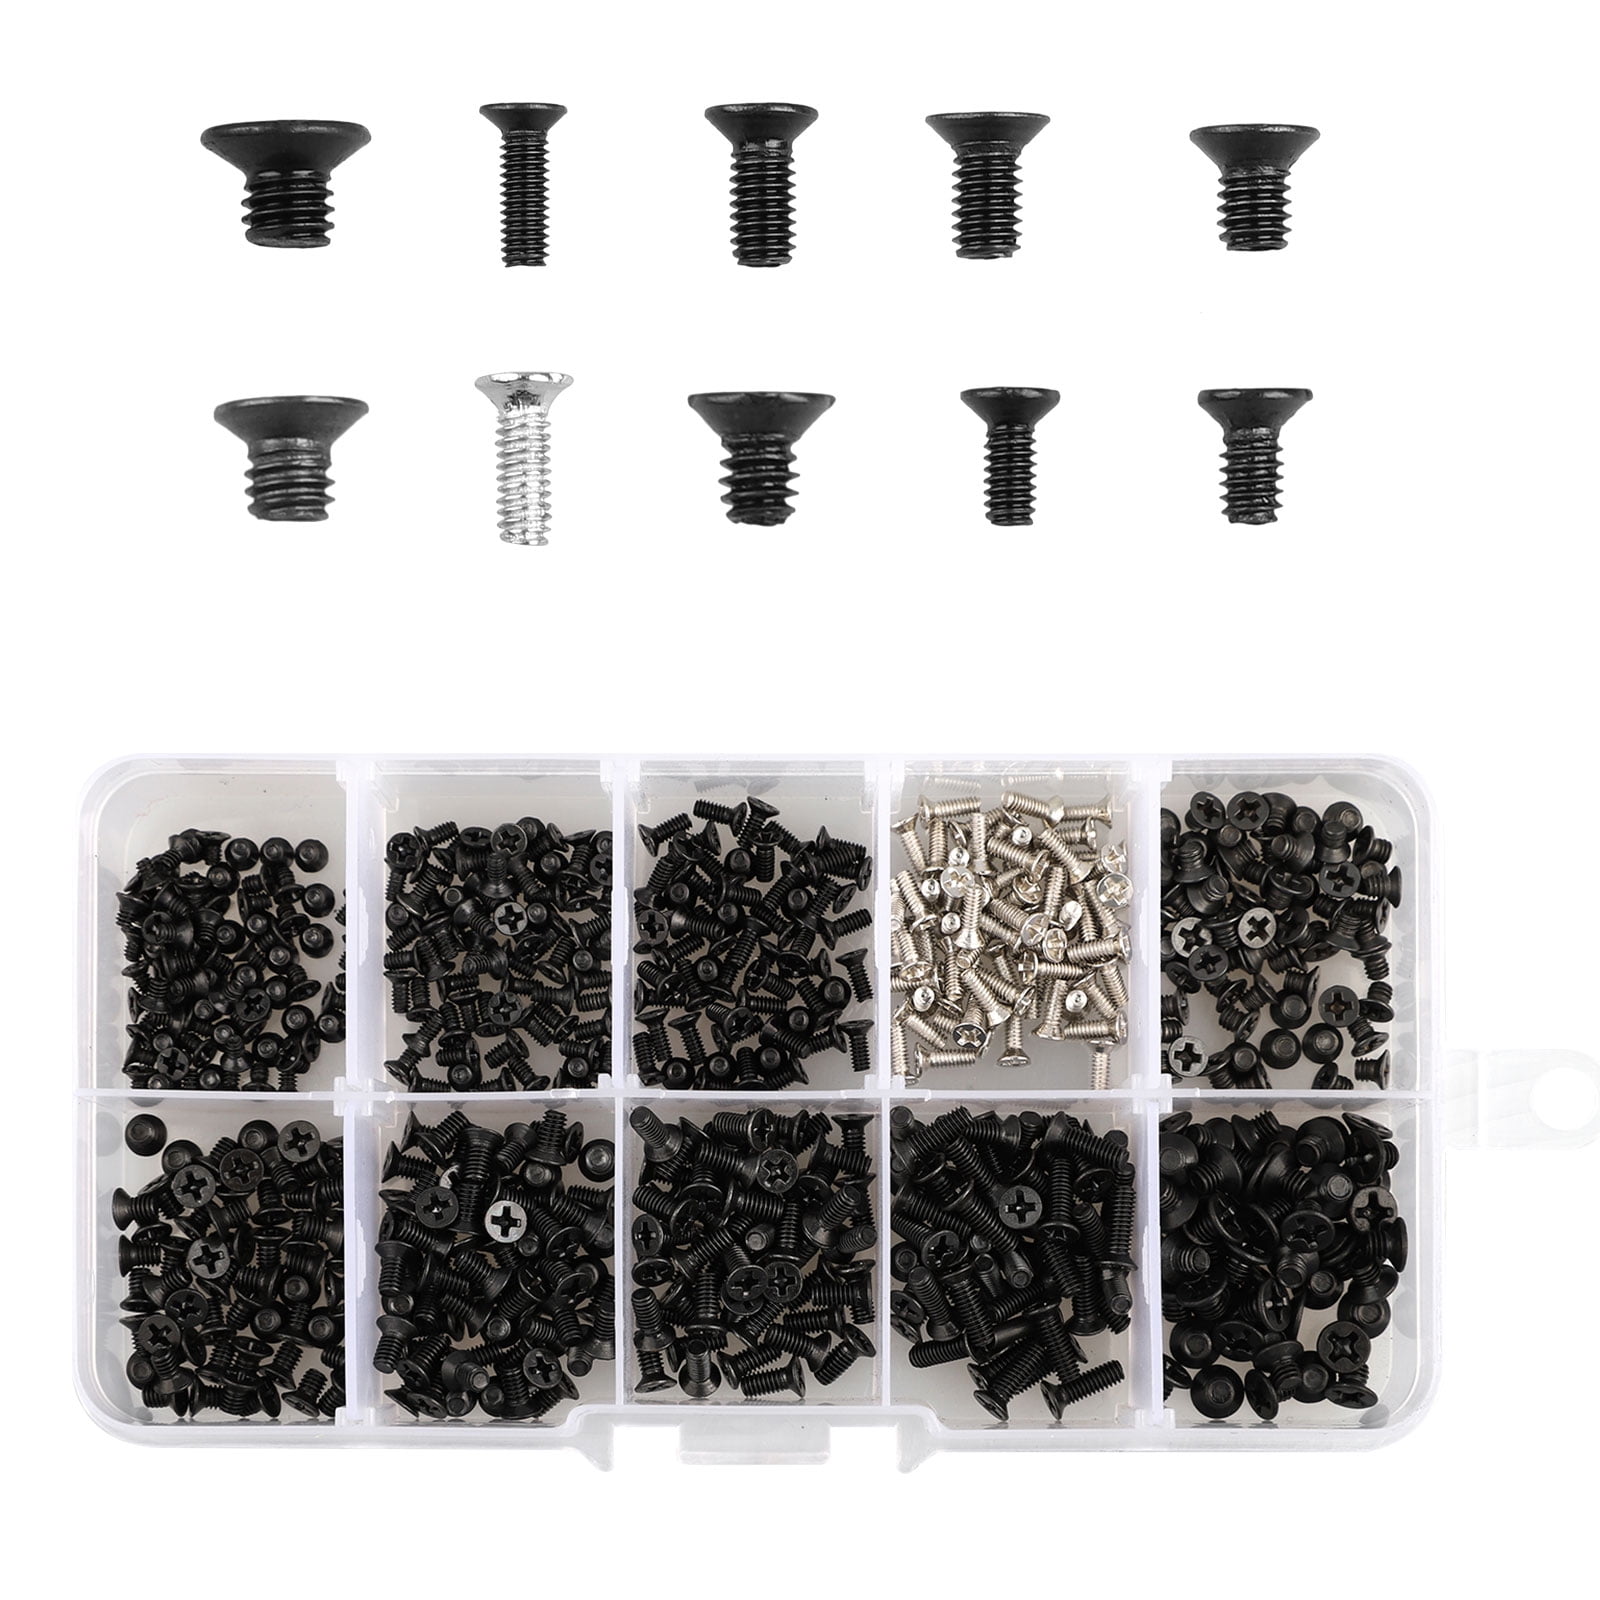 500 Piece Computer Screw Kit M2 M2.5 M3 DIY Assortment for Motherboard 